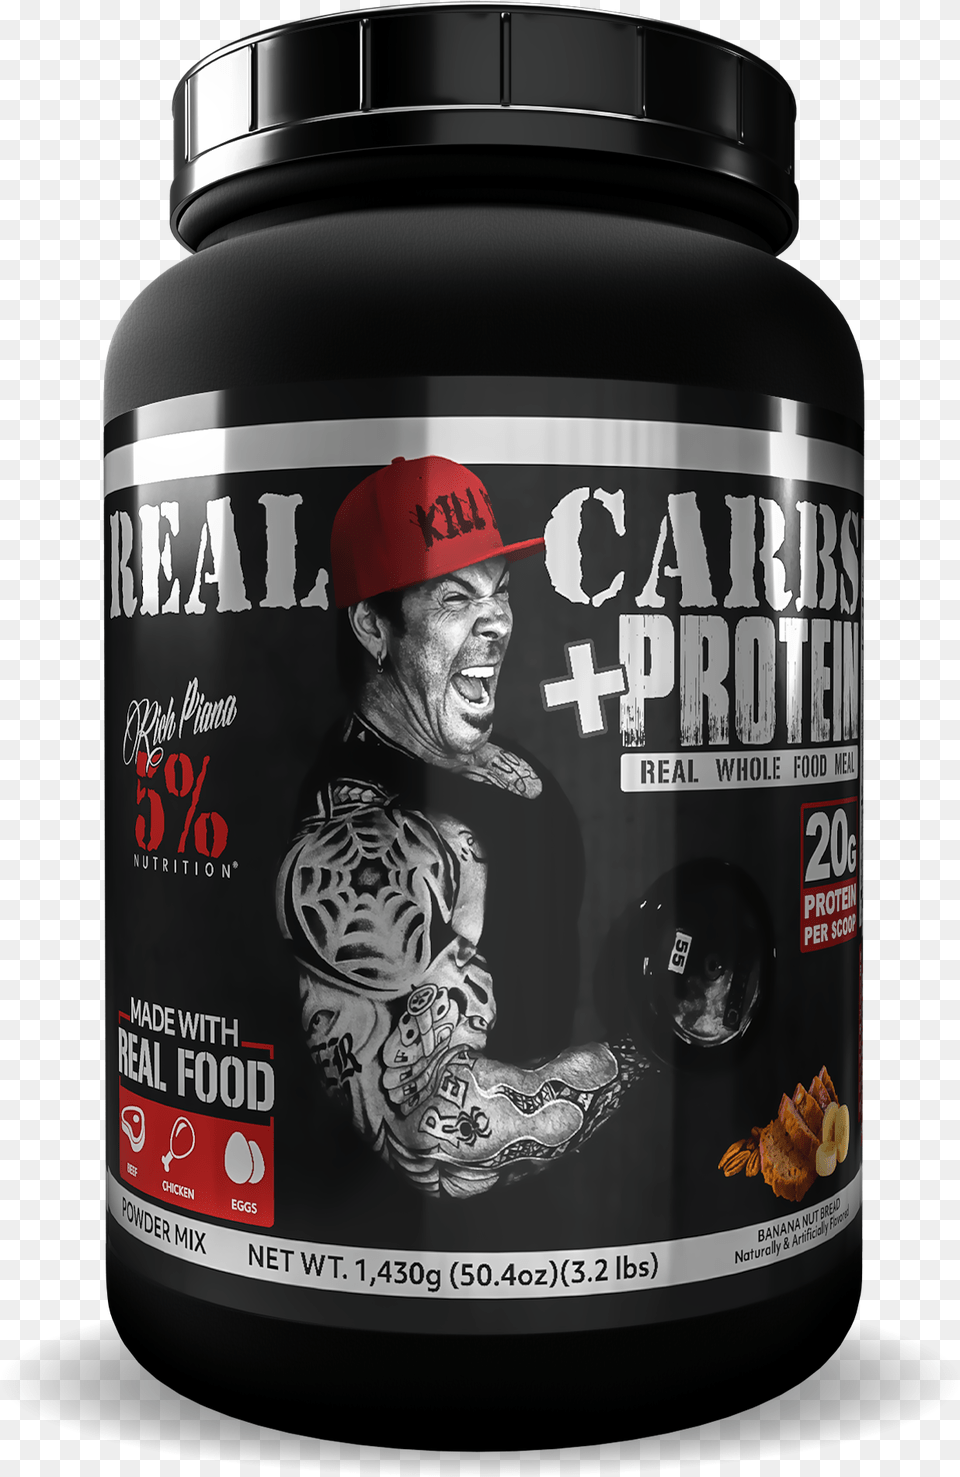 Real Carbs Proteindata Max Width 2000data Max 5 Real Carbs Protein, Jar, Adult, Skin, Person Png Image